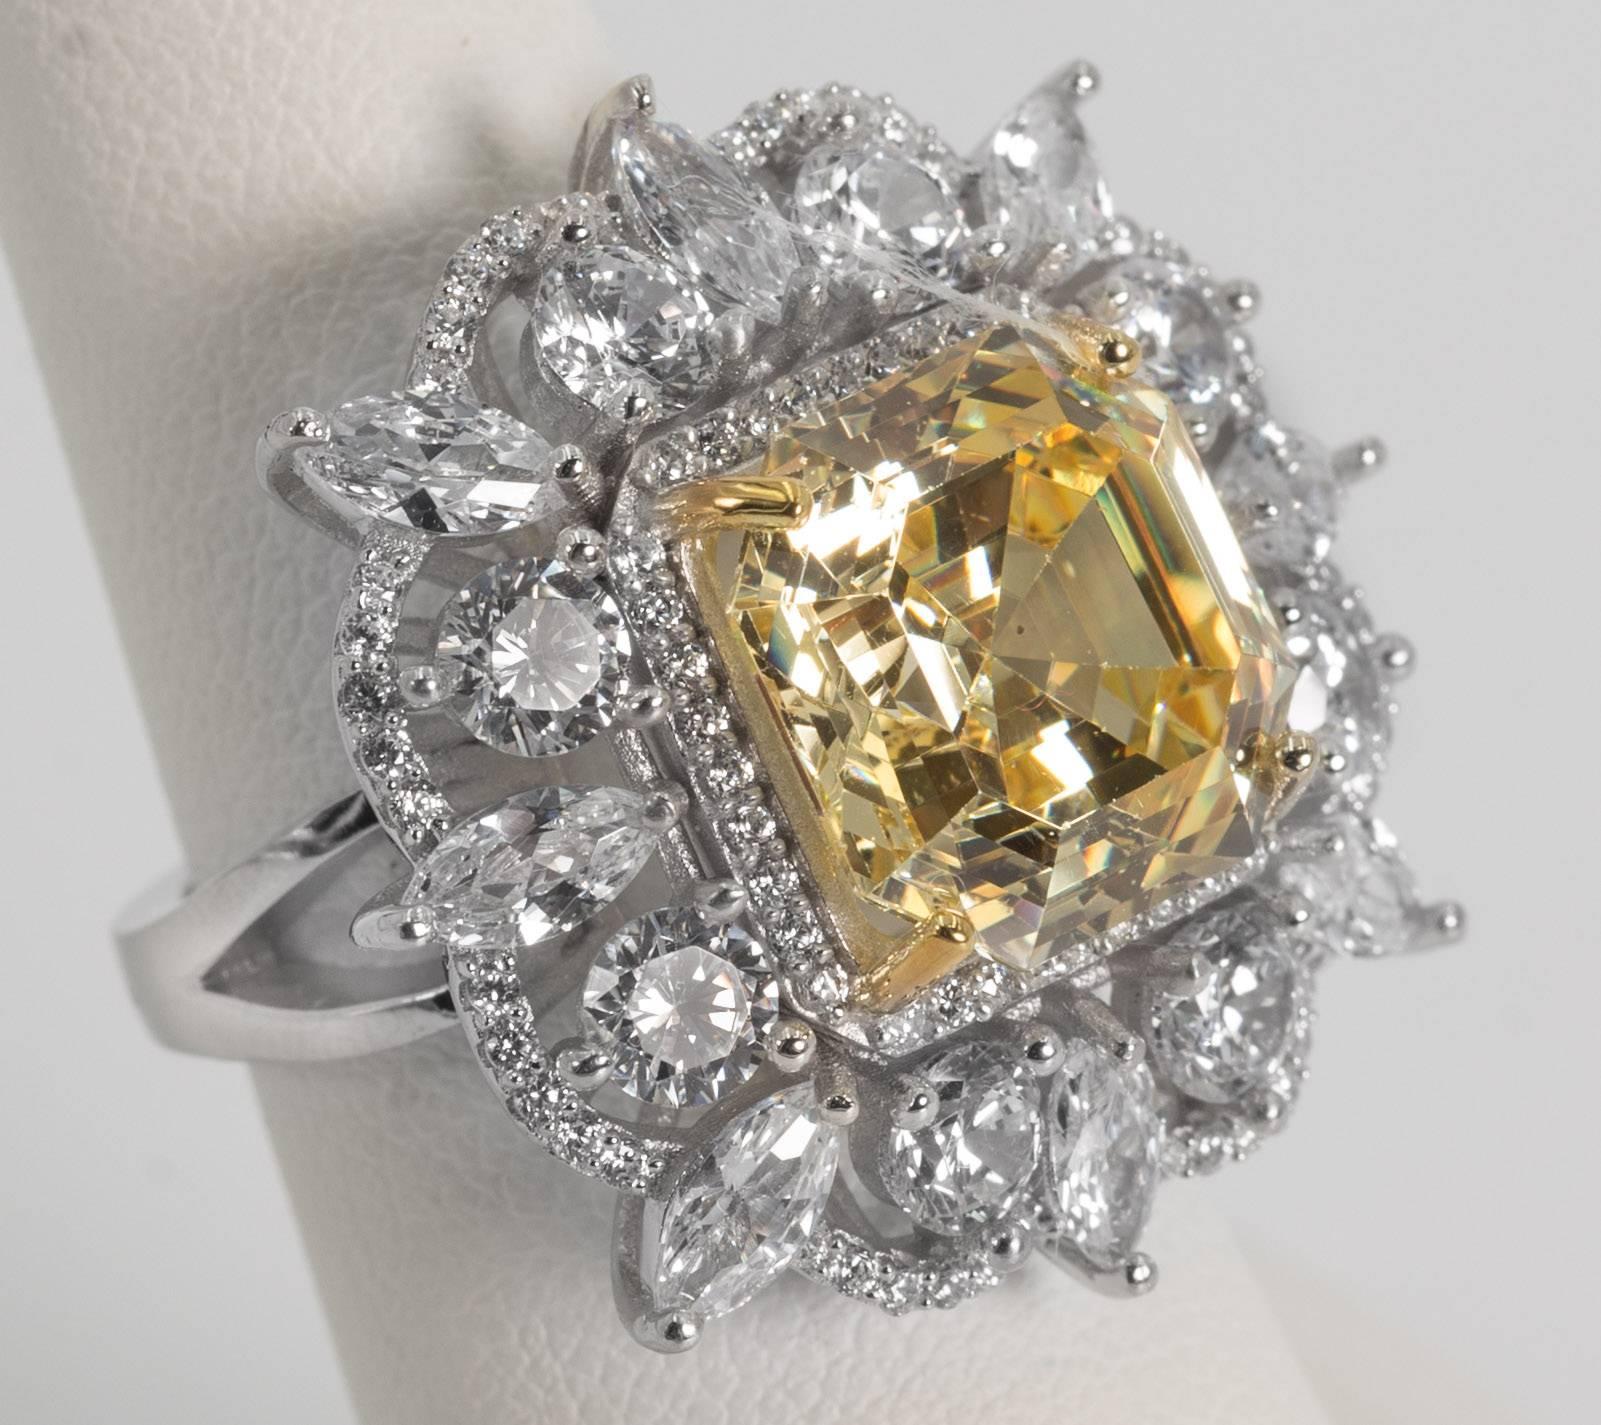 
A 15 carat fancy intense canary yellow hand special cut emerald cut cubic zirconia nestled amongst fancy cut white faux diamonds set in sterling designed to the highest fine standards possible. A classic amazing sparkly and brilliant look that will